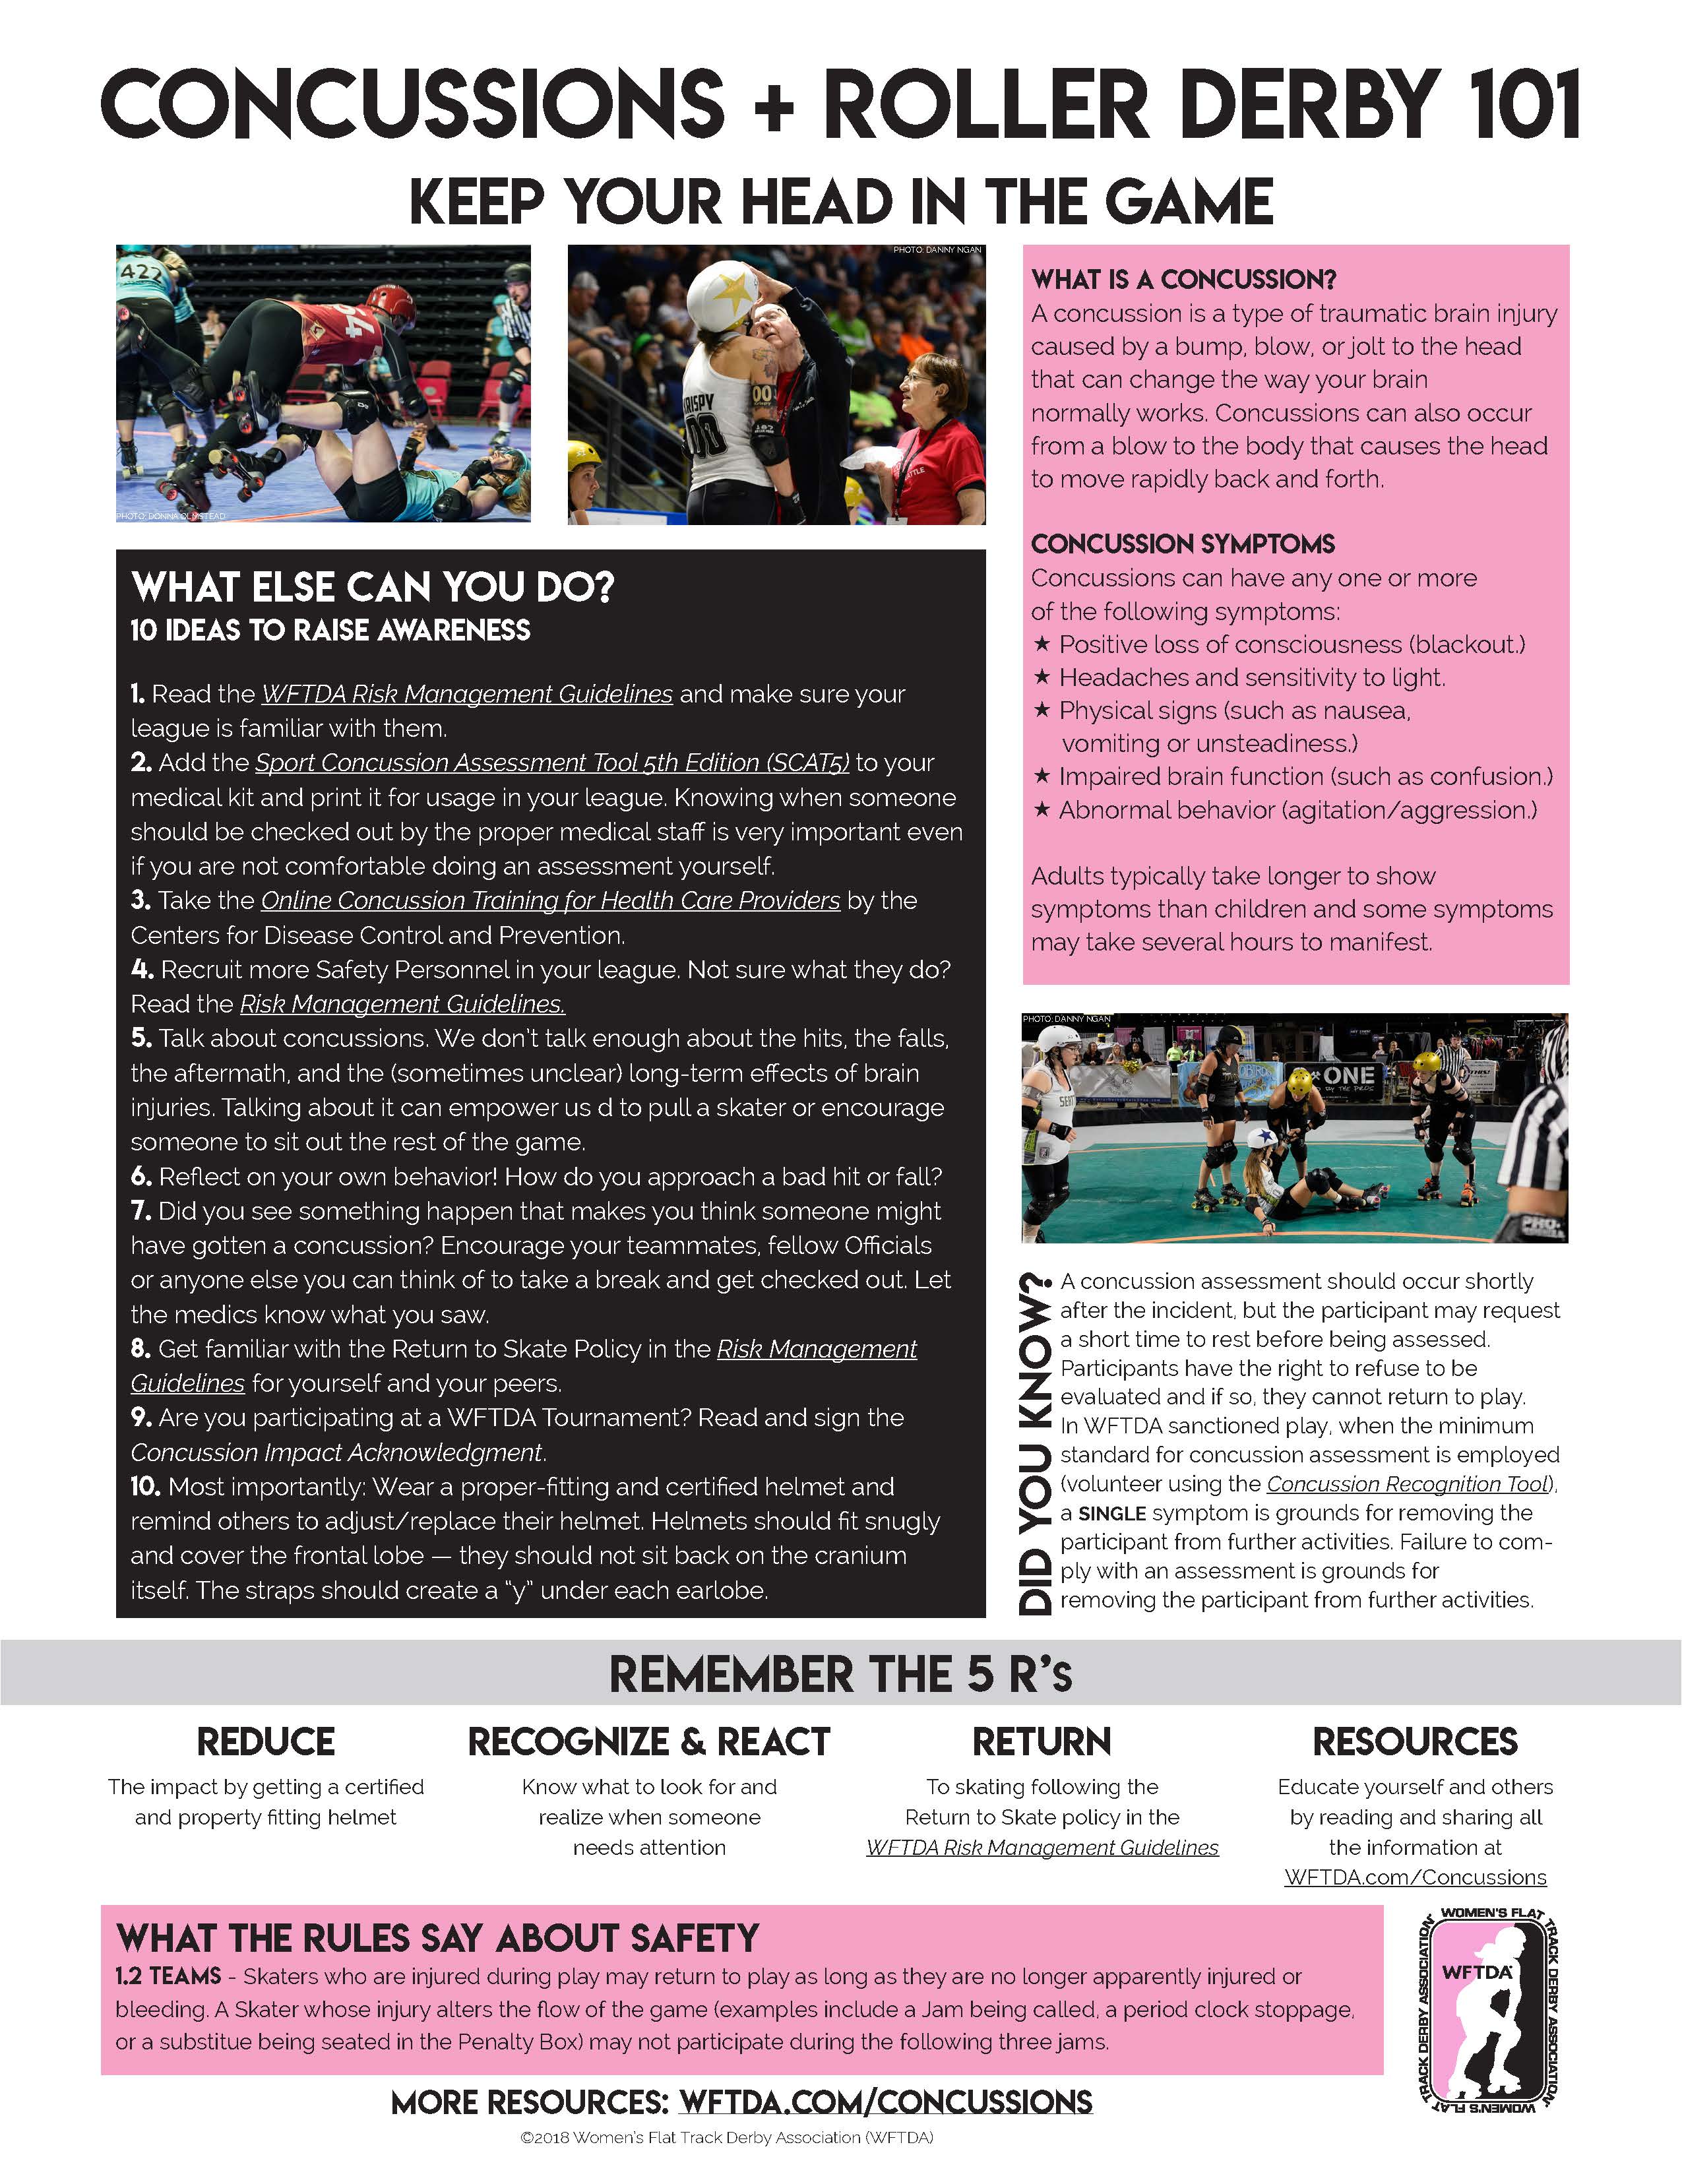 WFTDA Concussions in Roller Derby 101 Flyer